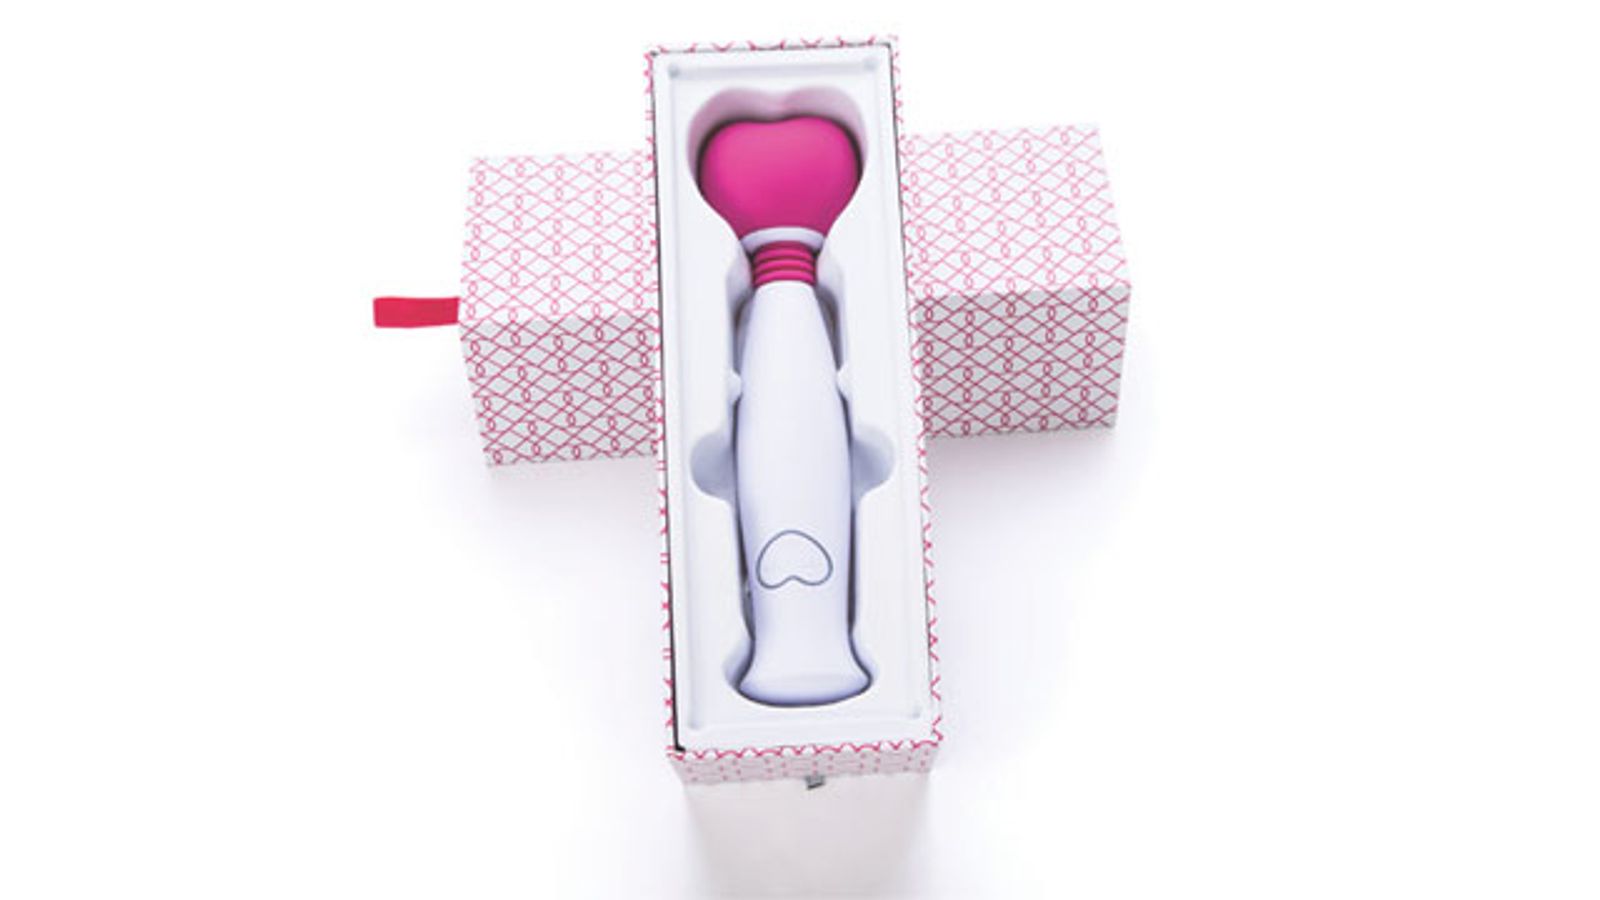 New Designs from OhMiBod’s Lovelife Collection Available From Entrenue